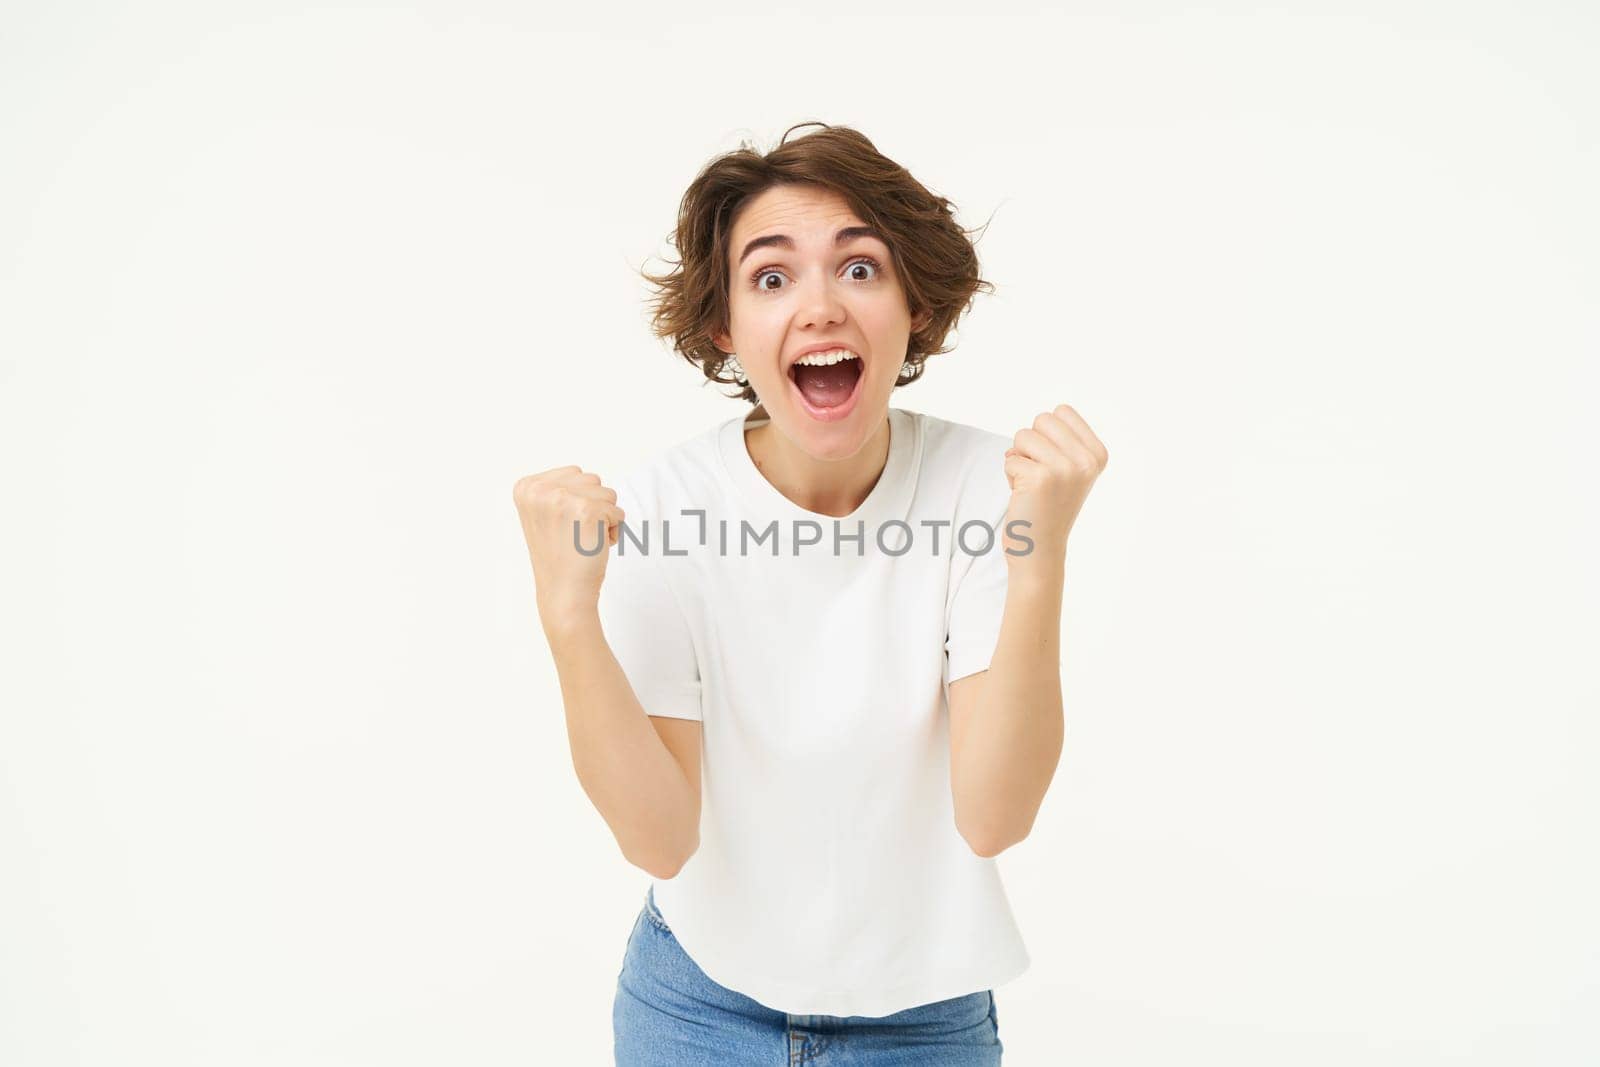 Cheerful brunette woman winning, triumphing, celebrating victory, achieves goal, stands over white background.